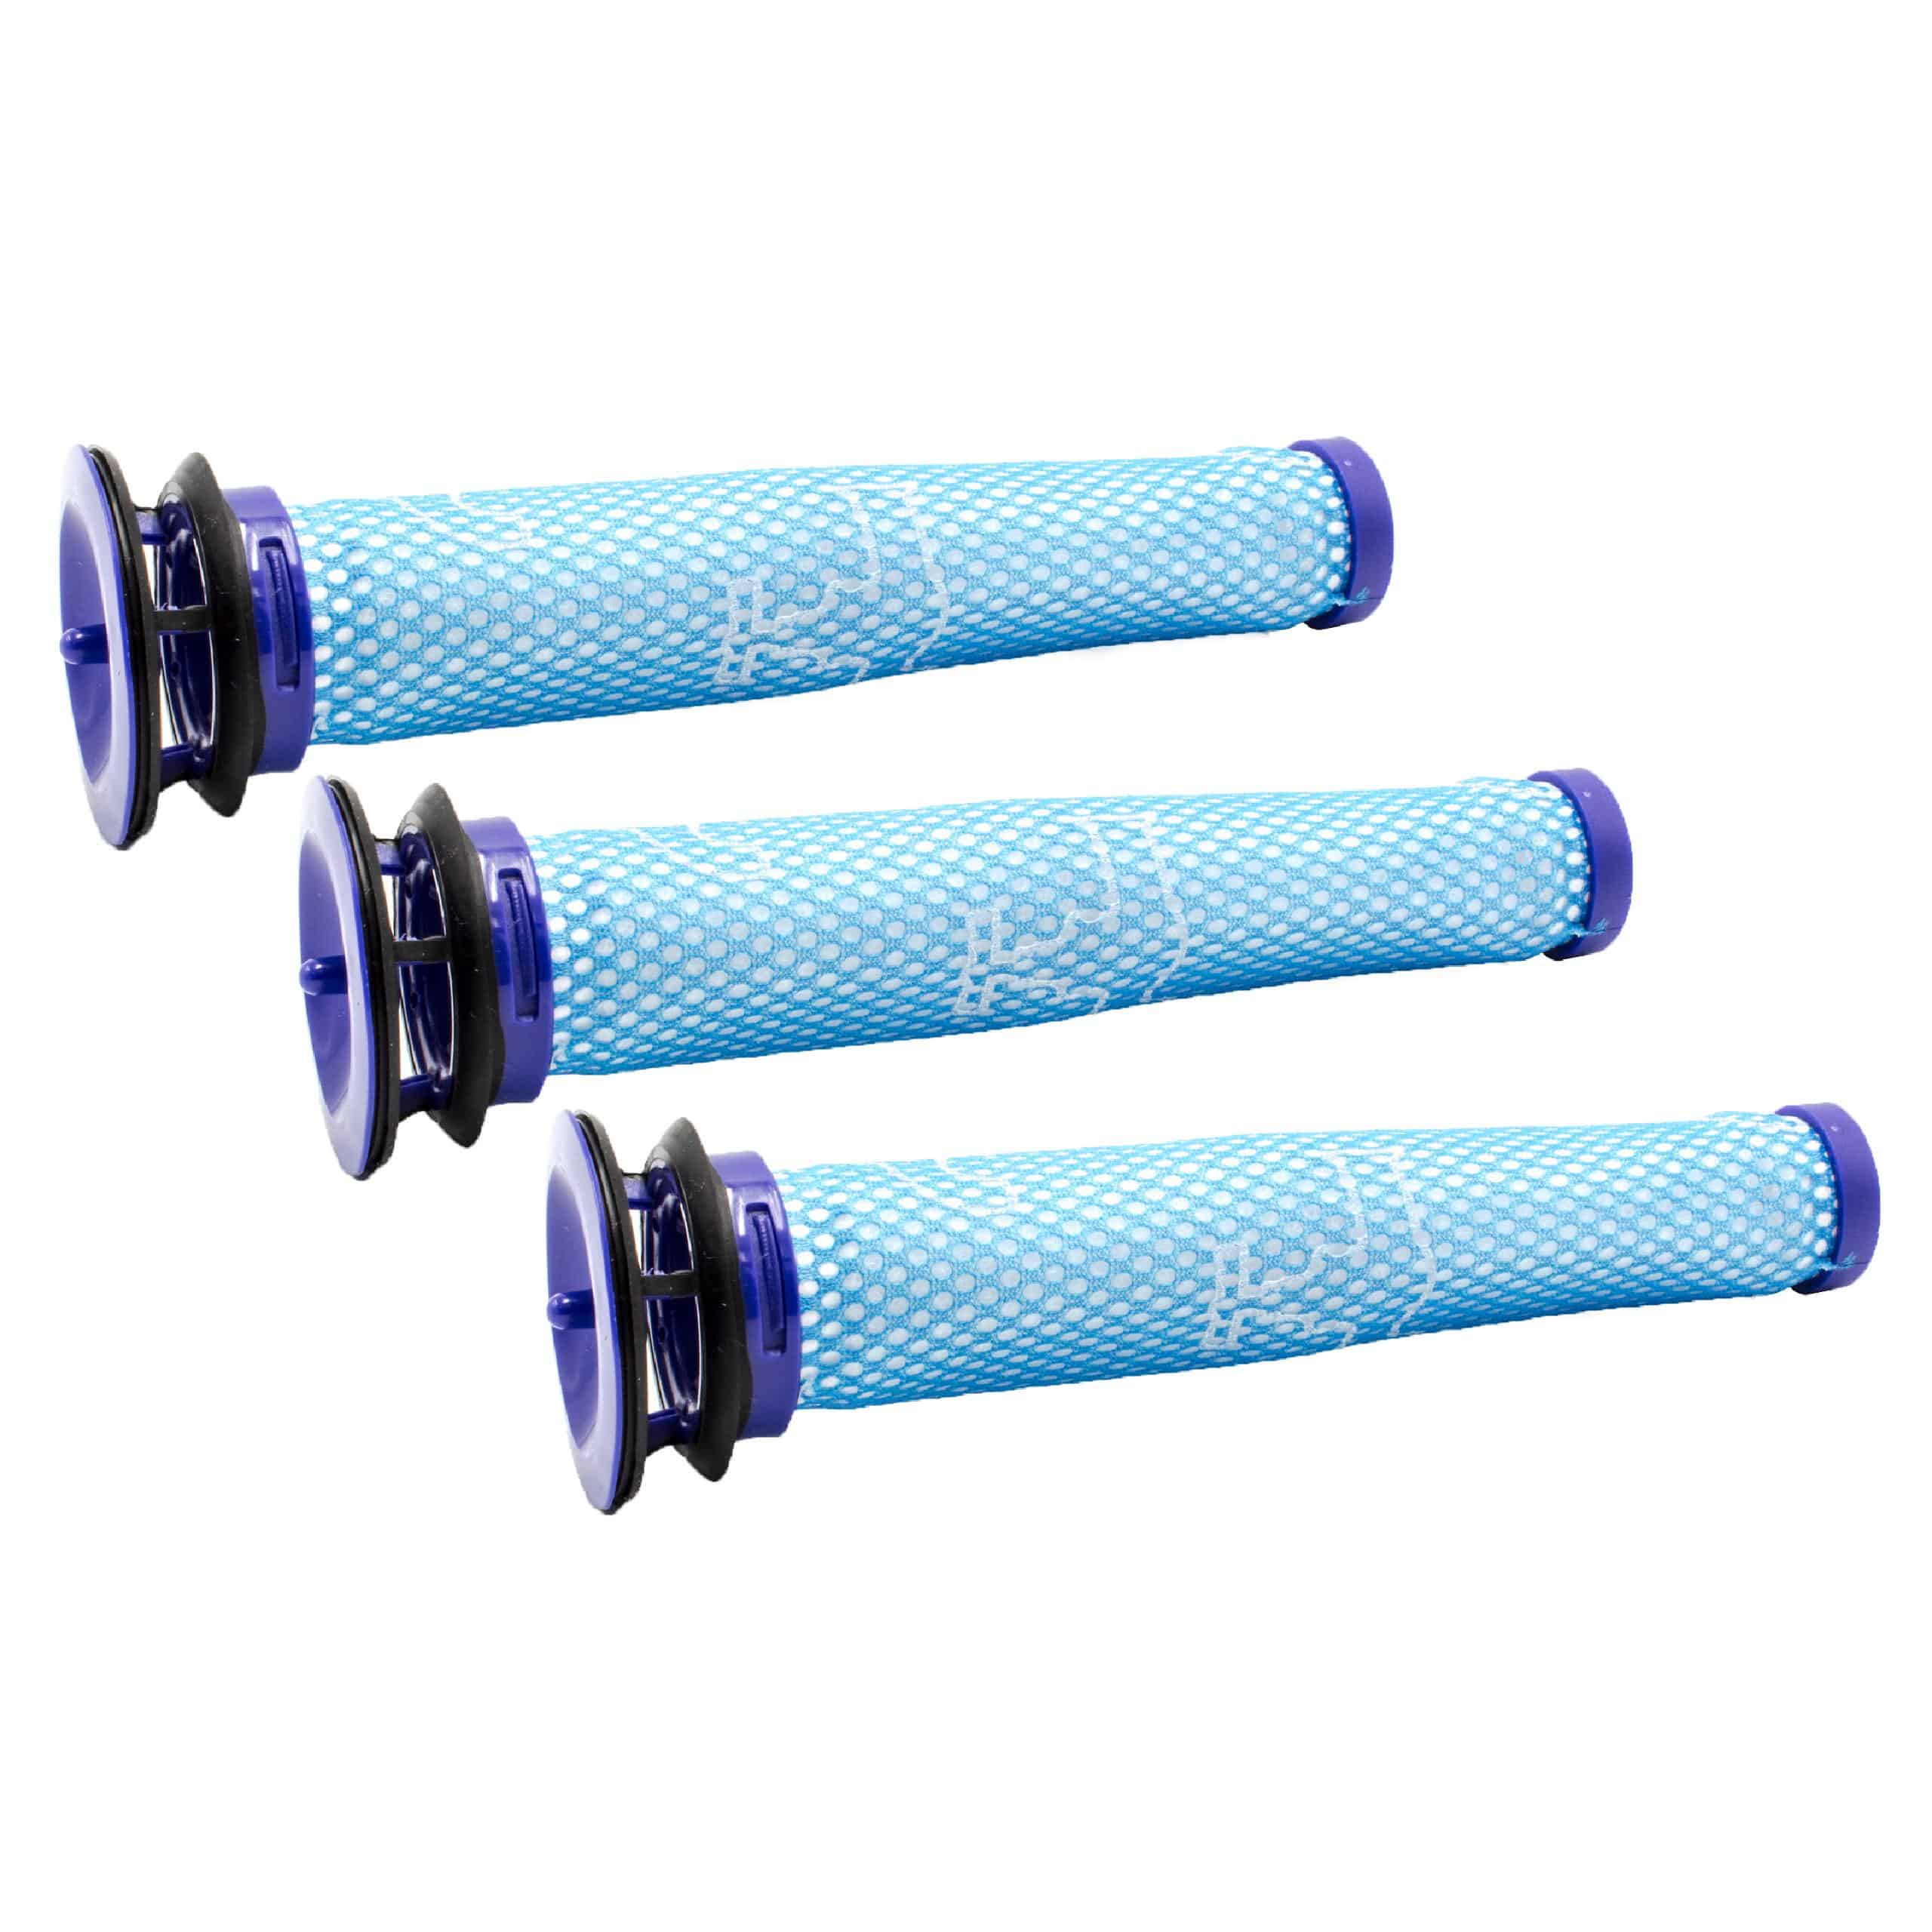 3x pre-motor filter replaces Dyson 96566101, 965661-01 for DysonVacuum Cleaner